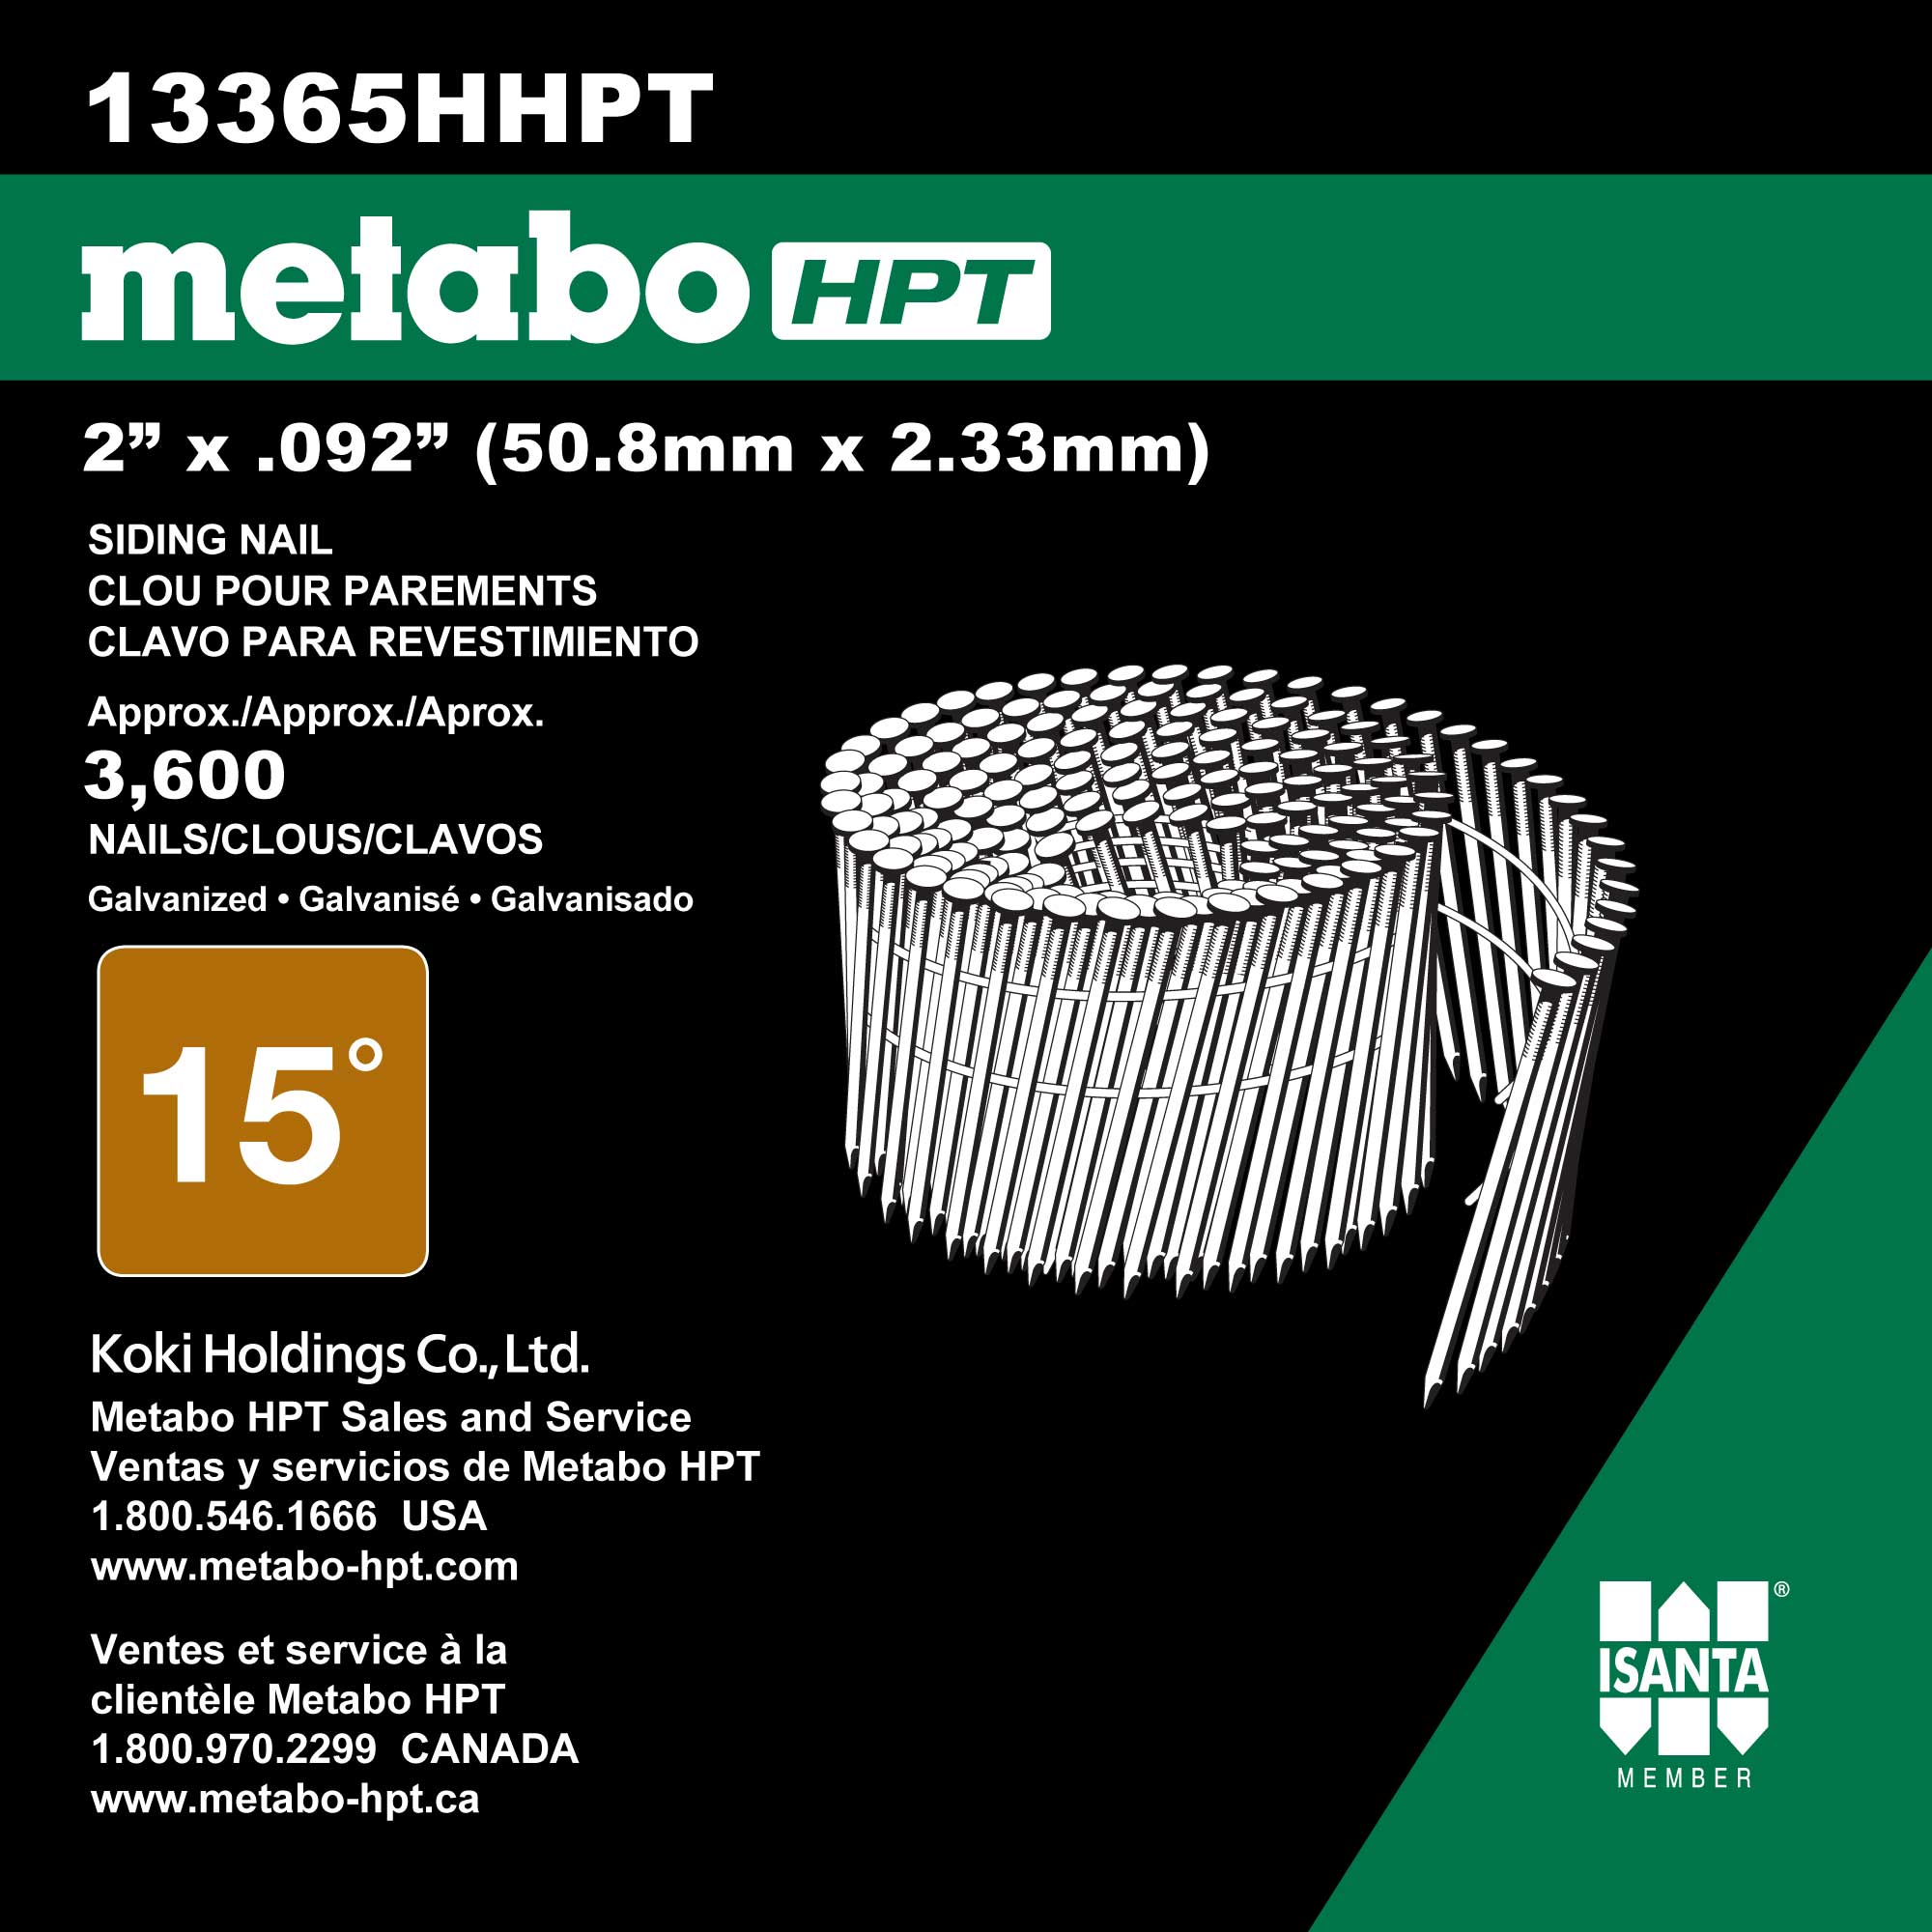 Metabo HPT 13365HHPT 2 Inch Full Round Head Wire Coil Siding Nail (3600 Count)